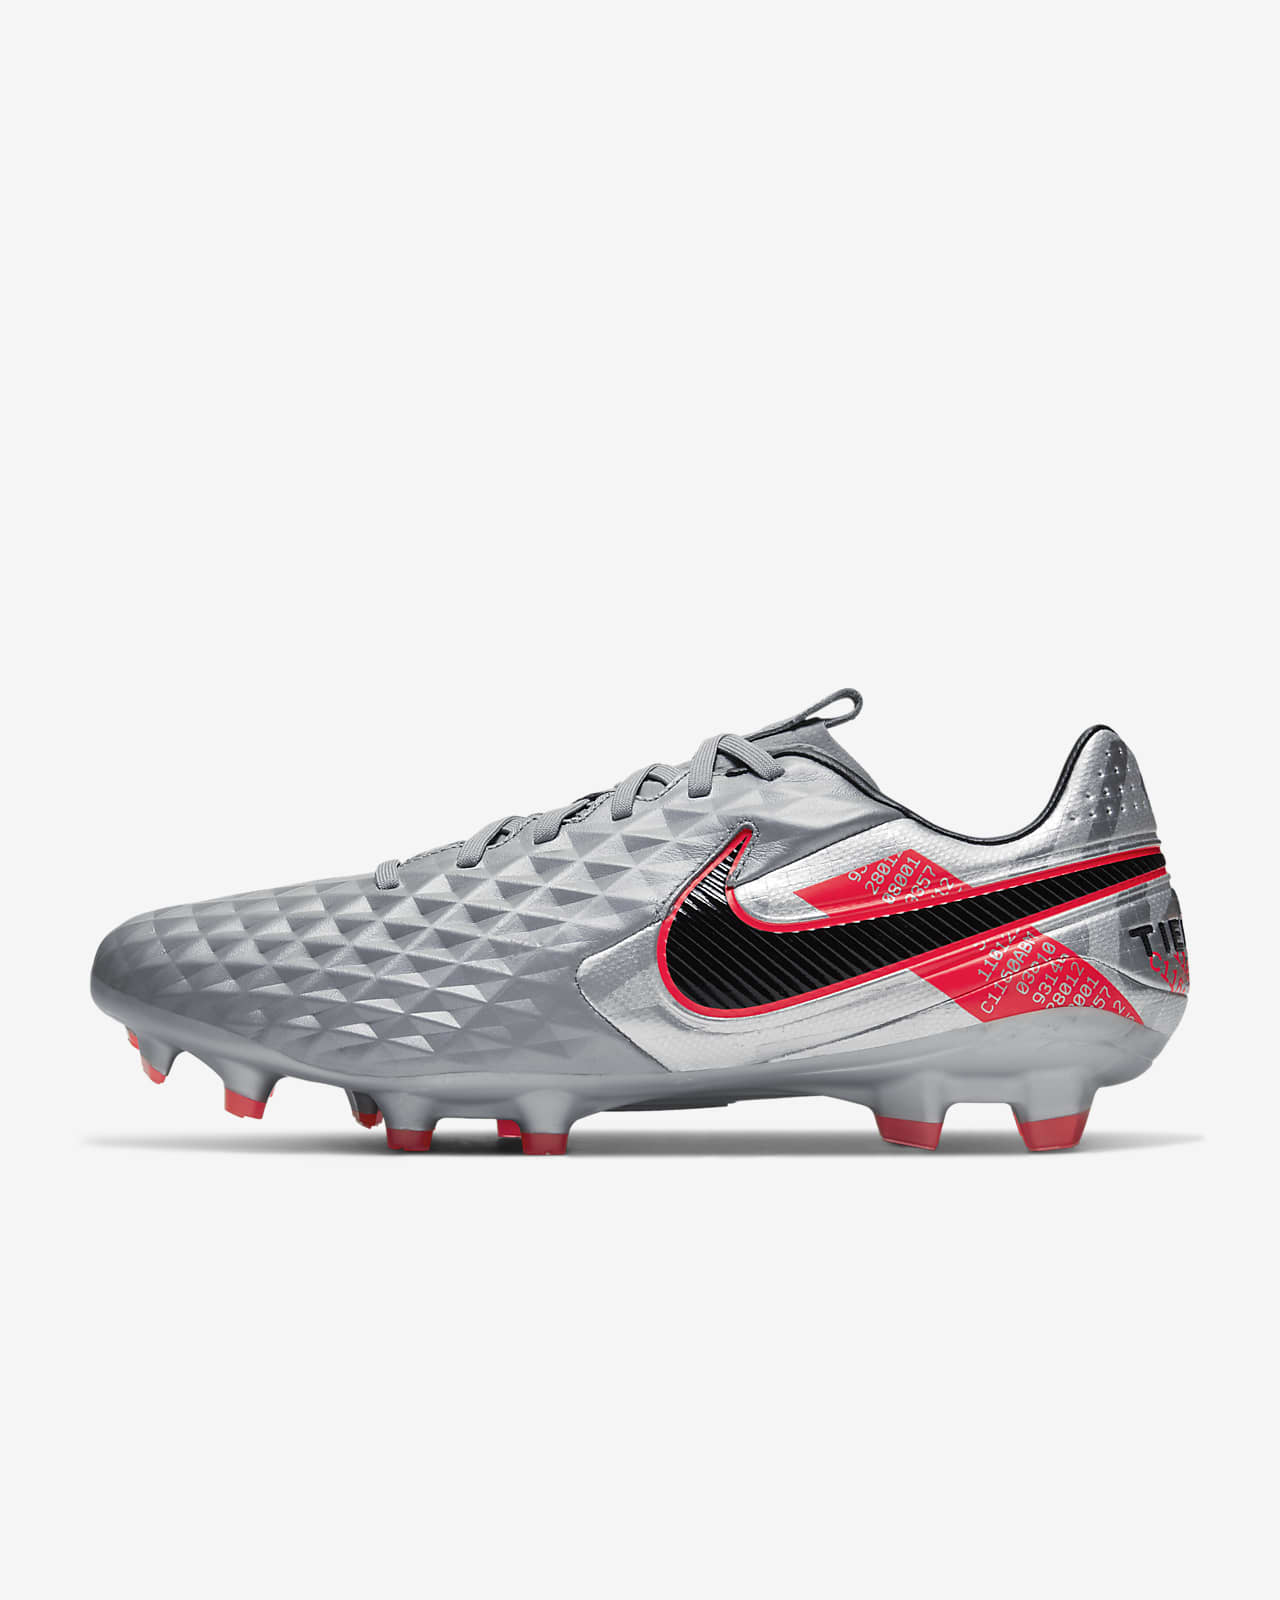 Nike Tiempo Legend 8 Pro FG Firm-Ground Soccer Cleat. Nike JP